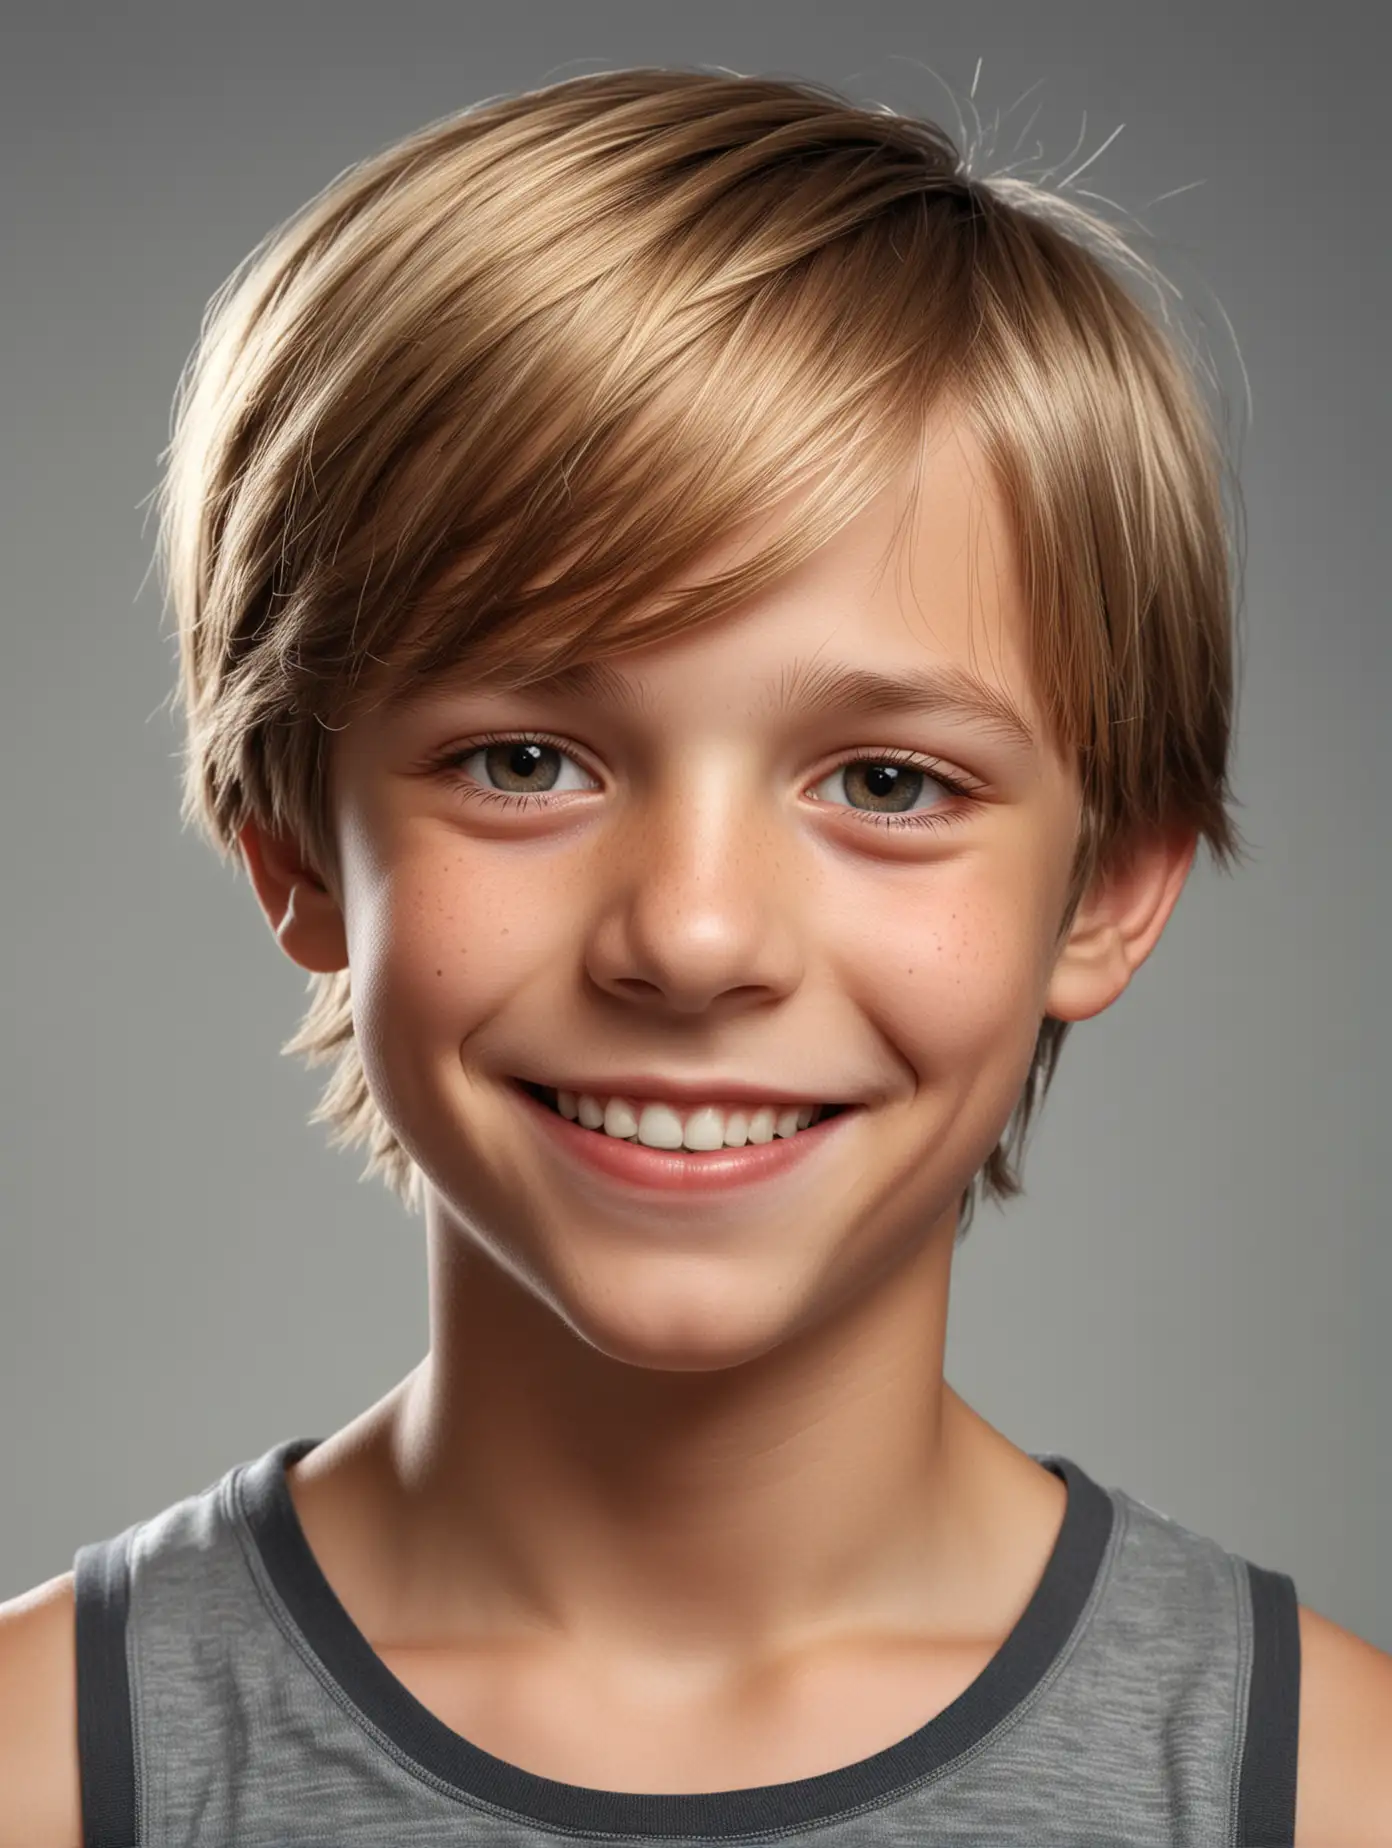 Portrait of Smiling TwelveYearOld Boy with Shiny Hair in Profile View